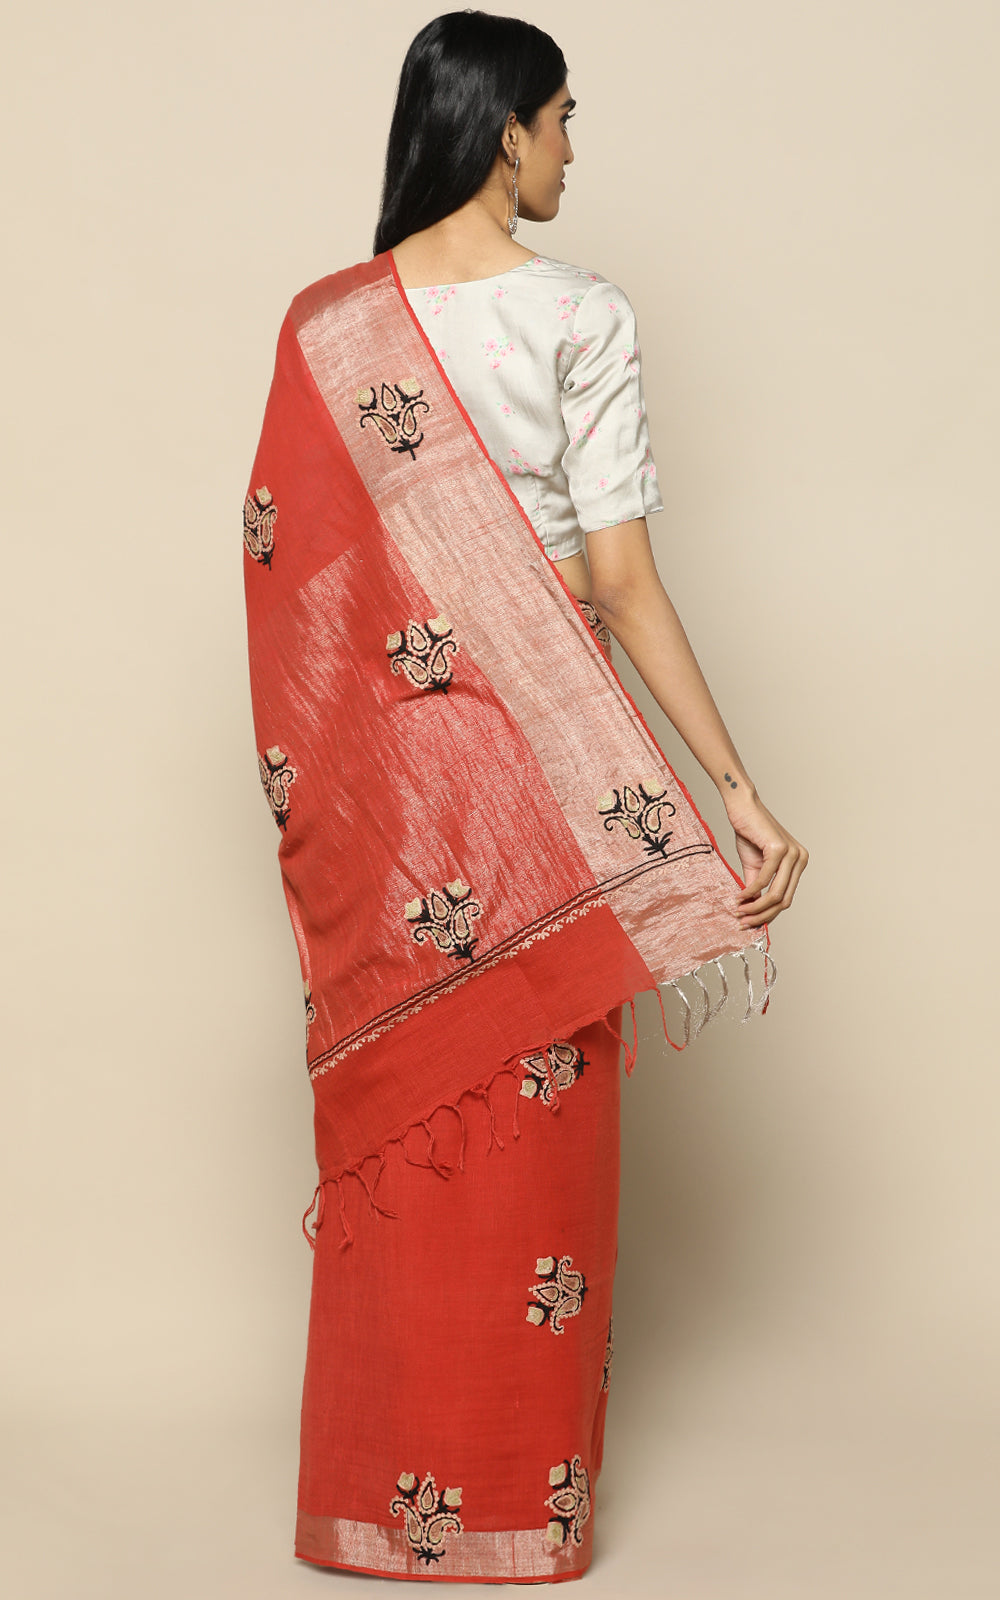 BRICK RED COTTON SAREE WITH KASHMIRI HAND EMBROIDERY